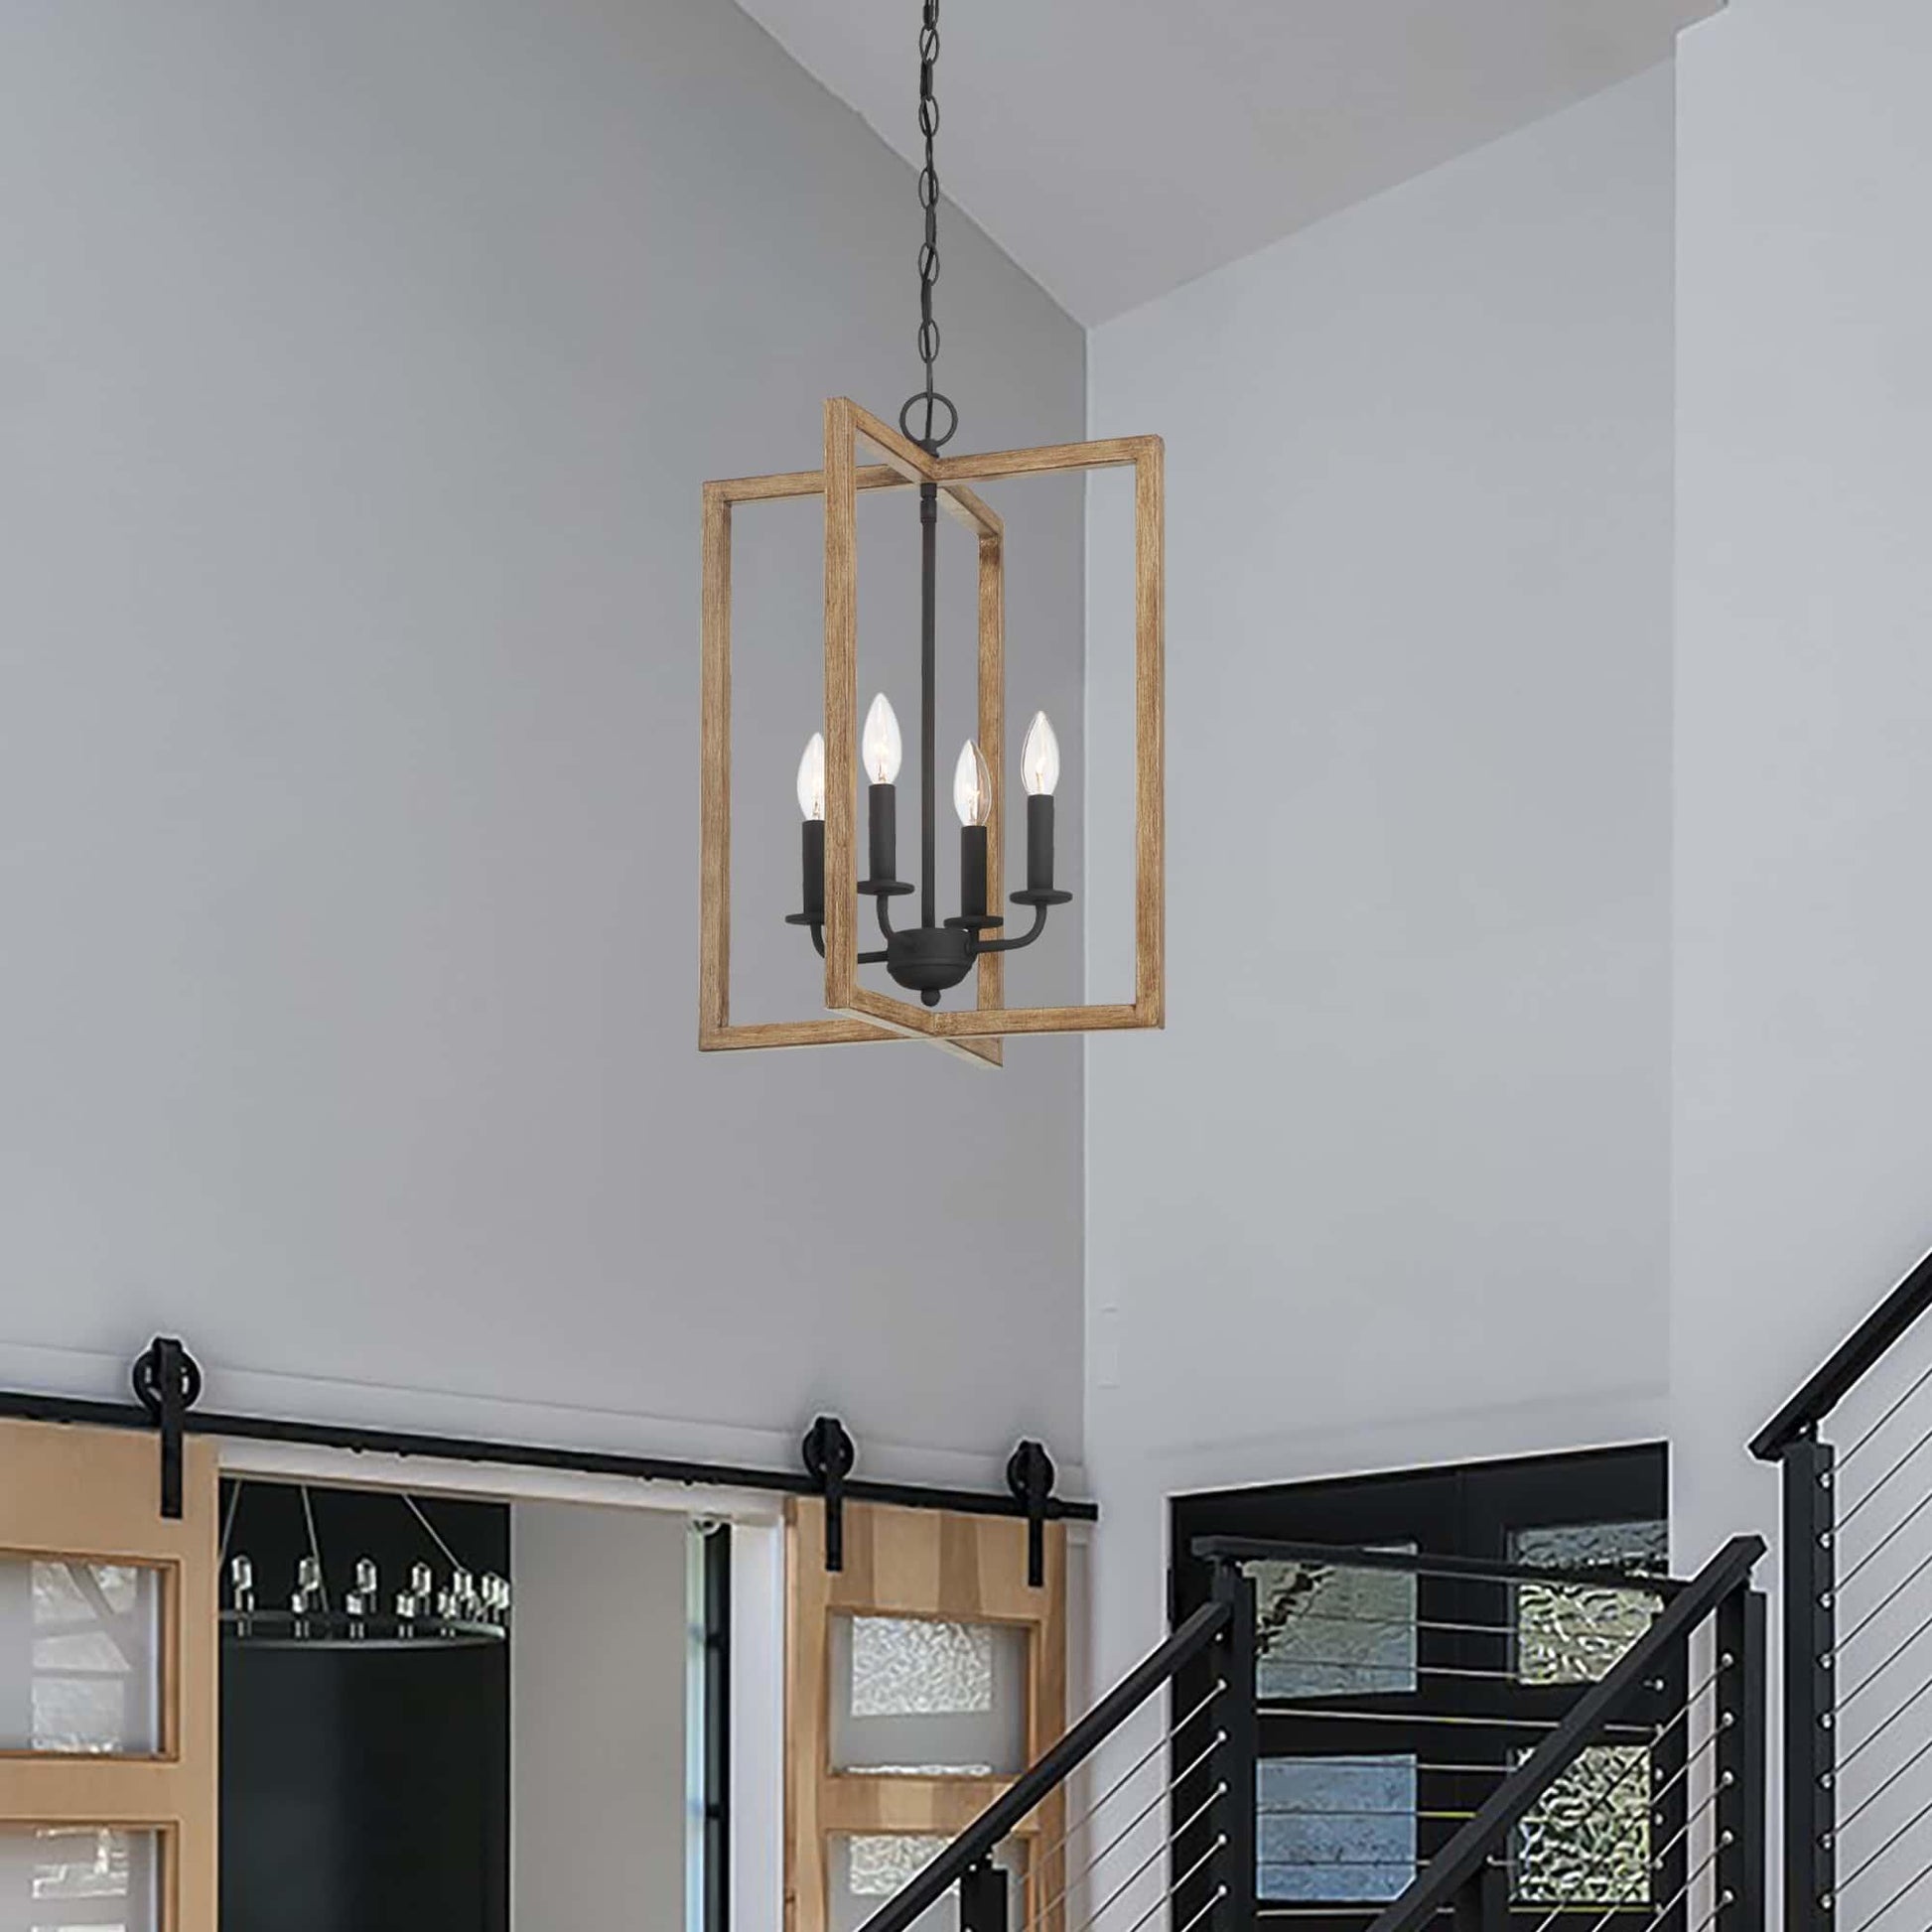 4 light candle style square chandelier (2) by ACROMA